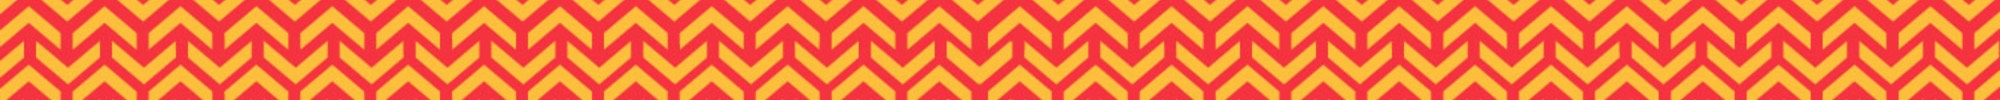 Red and yellow weave pattern